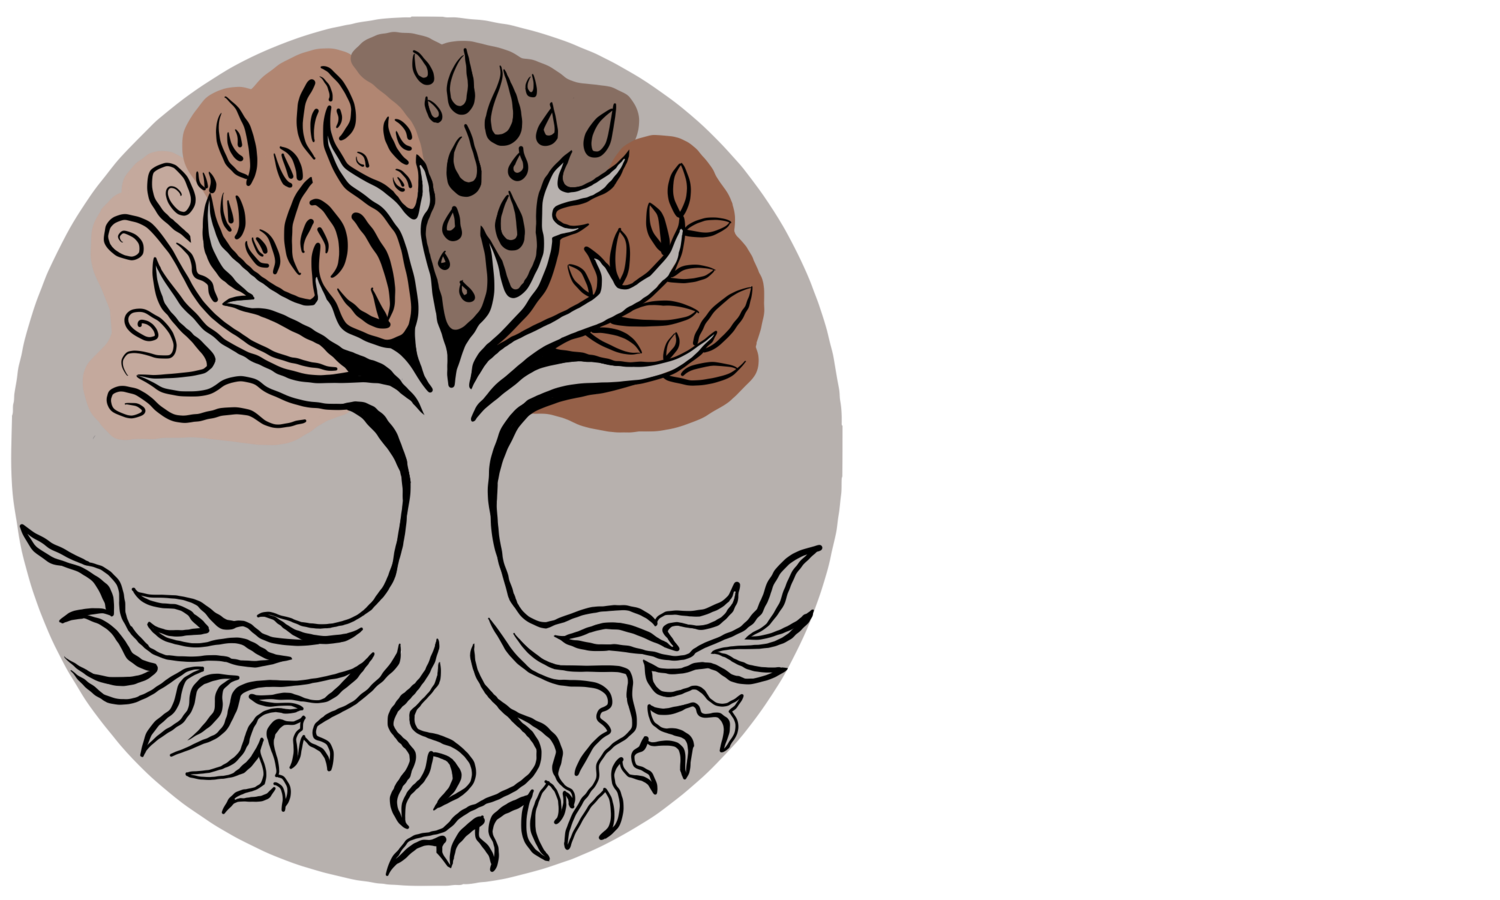 Parts of the Whole - The Body is Home